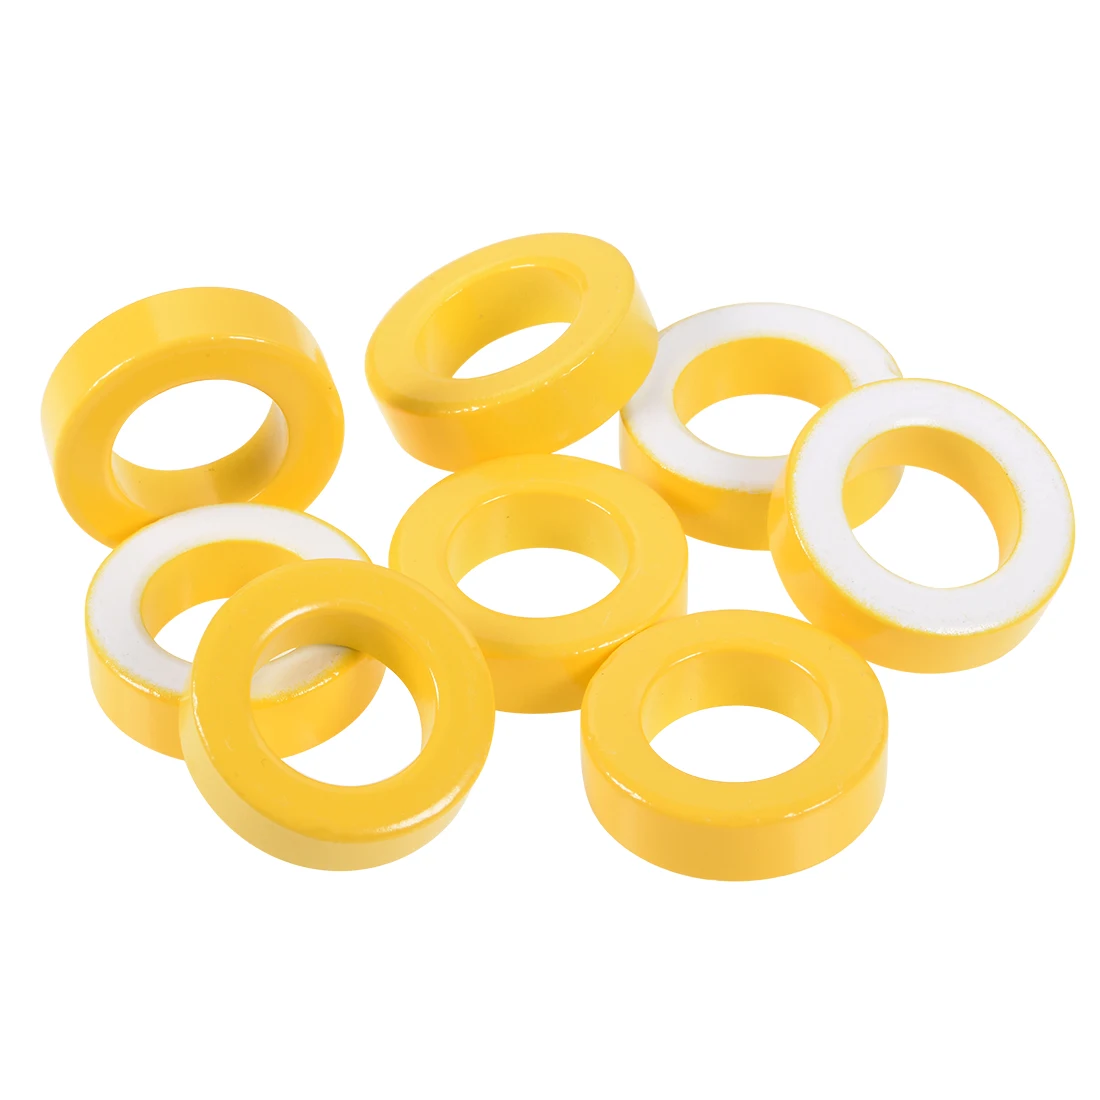 

8pcs 22x36.5x11mm Ferrite Ring Iron Powder Toroid Cores Yellow White Inductor Ferrite Rings for Power Transformers